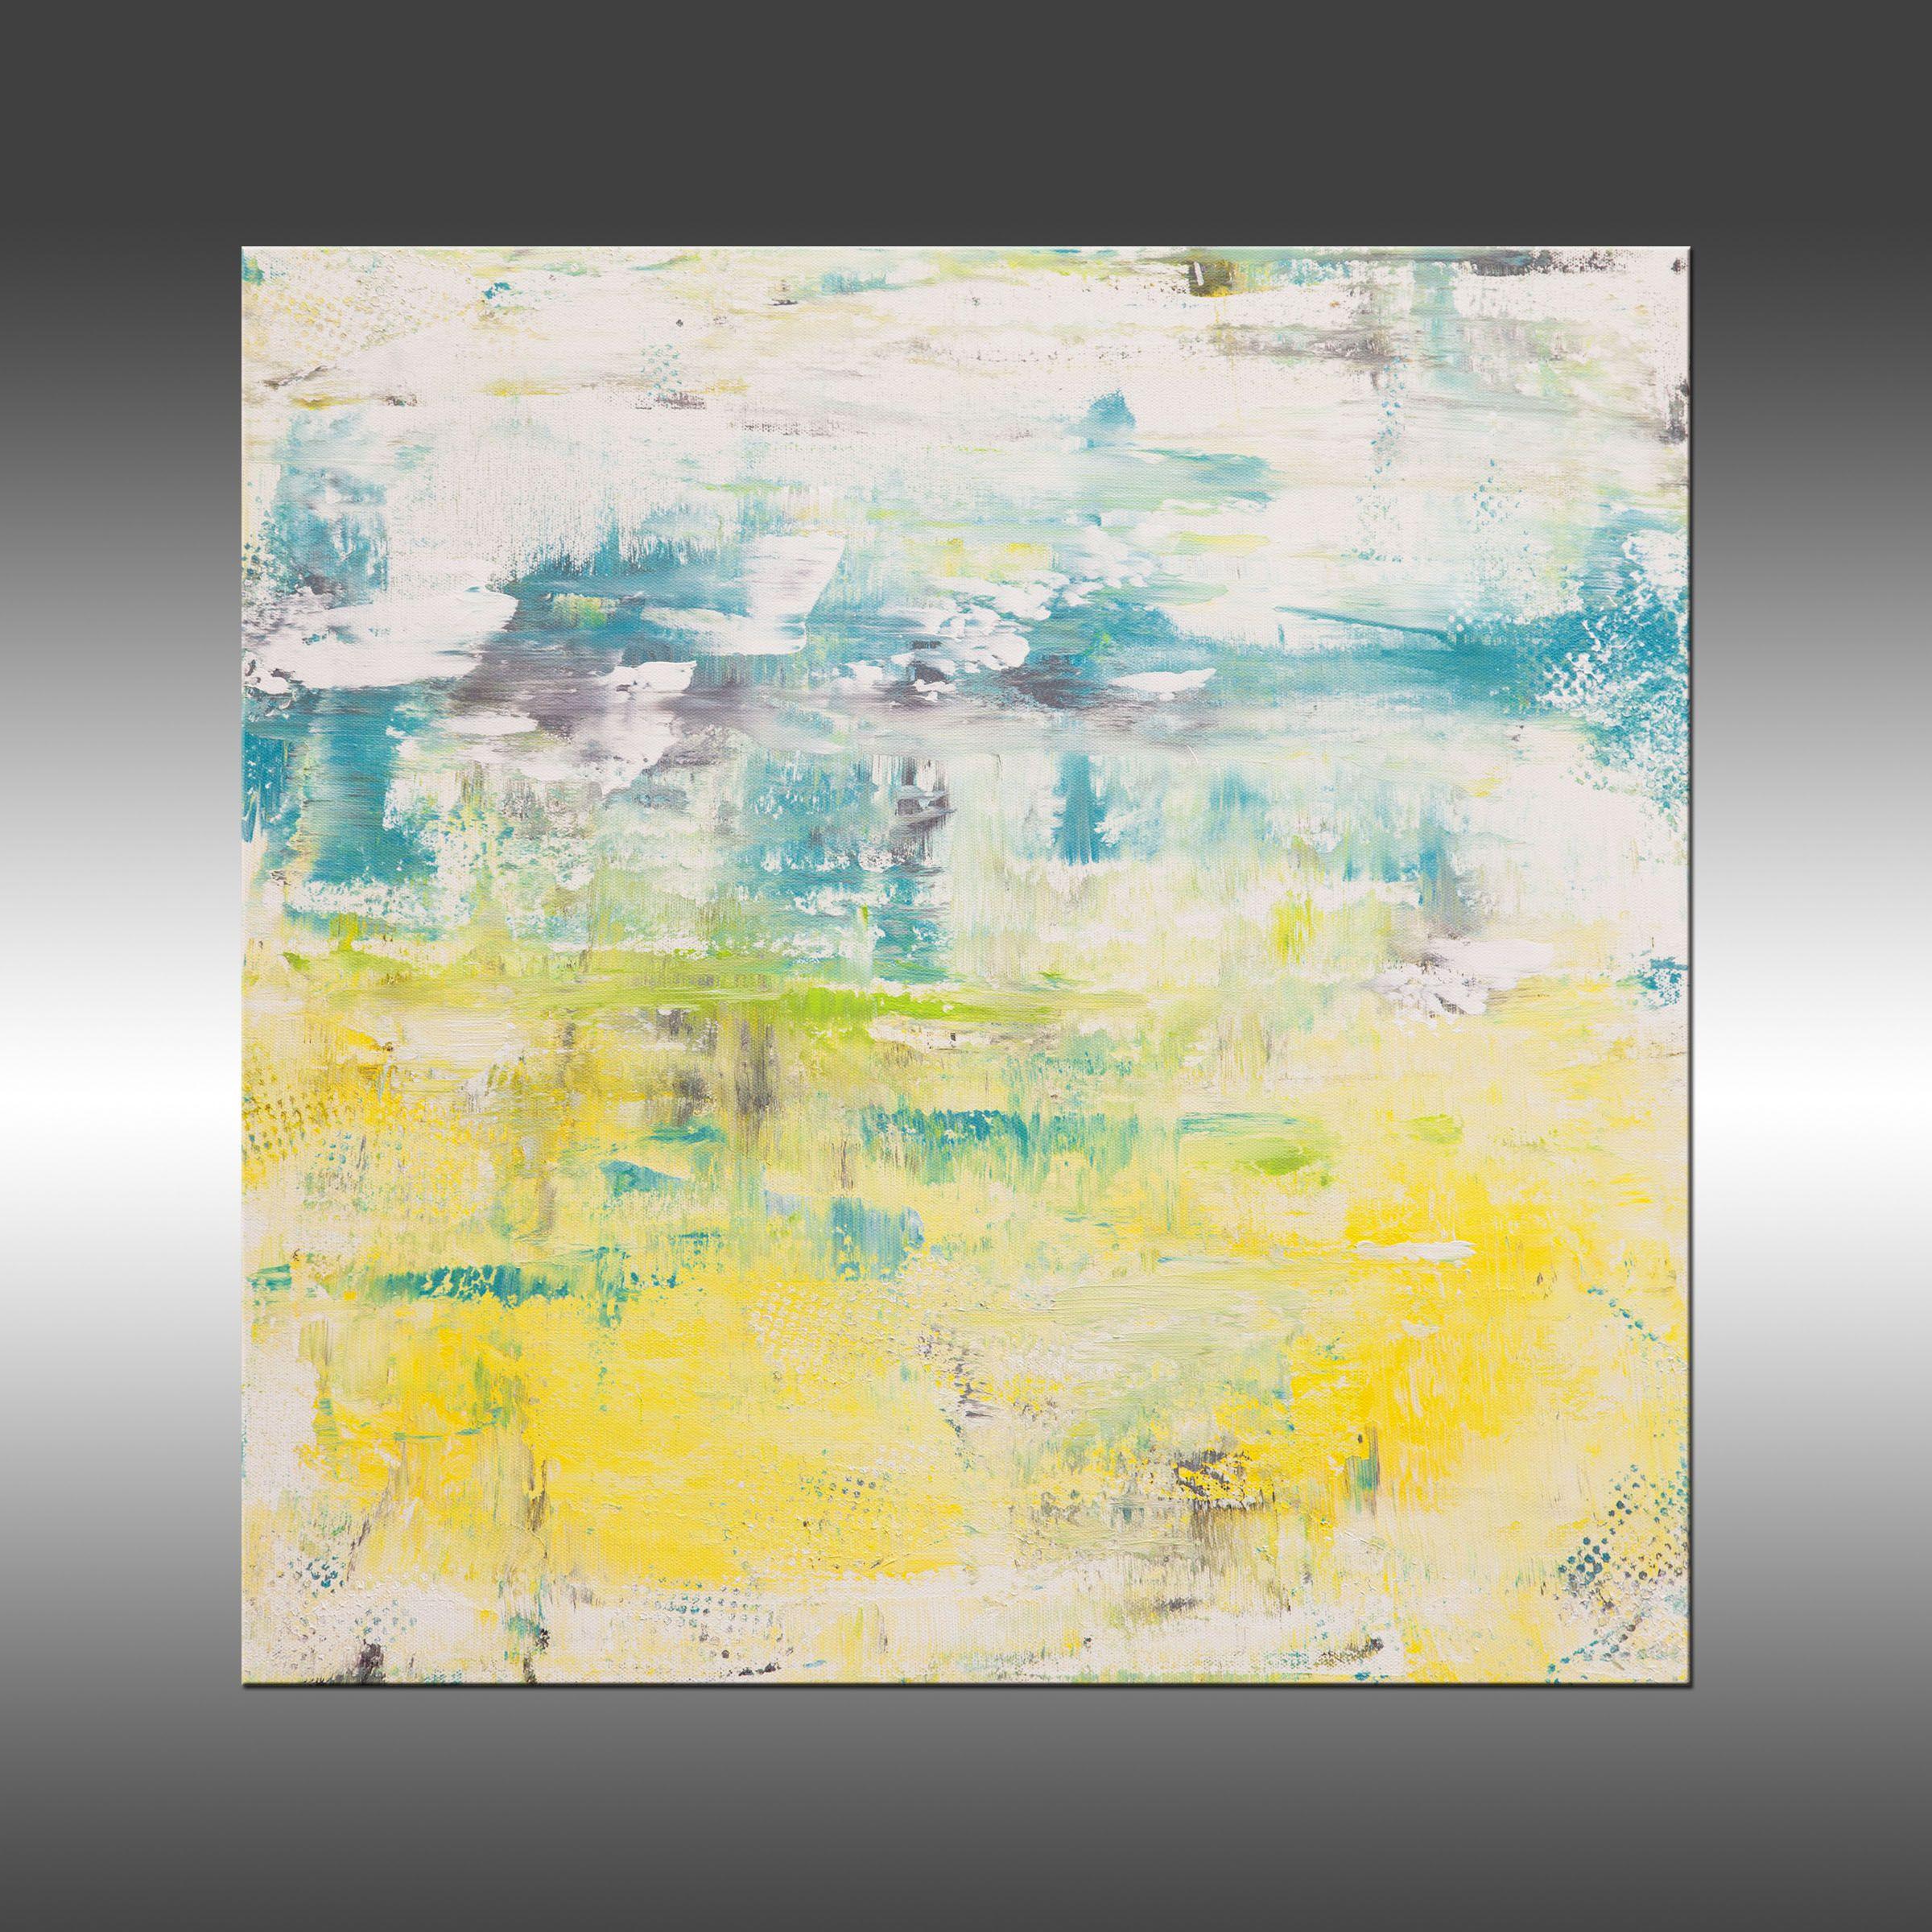 Modern Industrial 48 is an original painting, created with acrylic paint on gallery-wrapped canvas. It has a width of 24 inches and a height of 24 inches with a depth of 1 inch (24x24x1).    The colors used in the painting are white, gray, yellow,